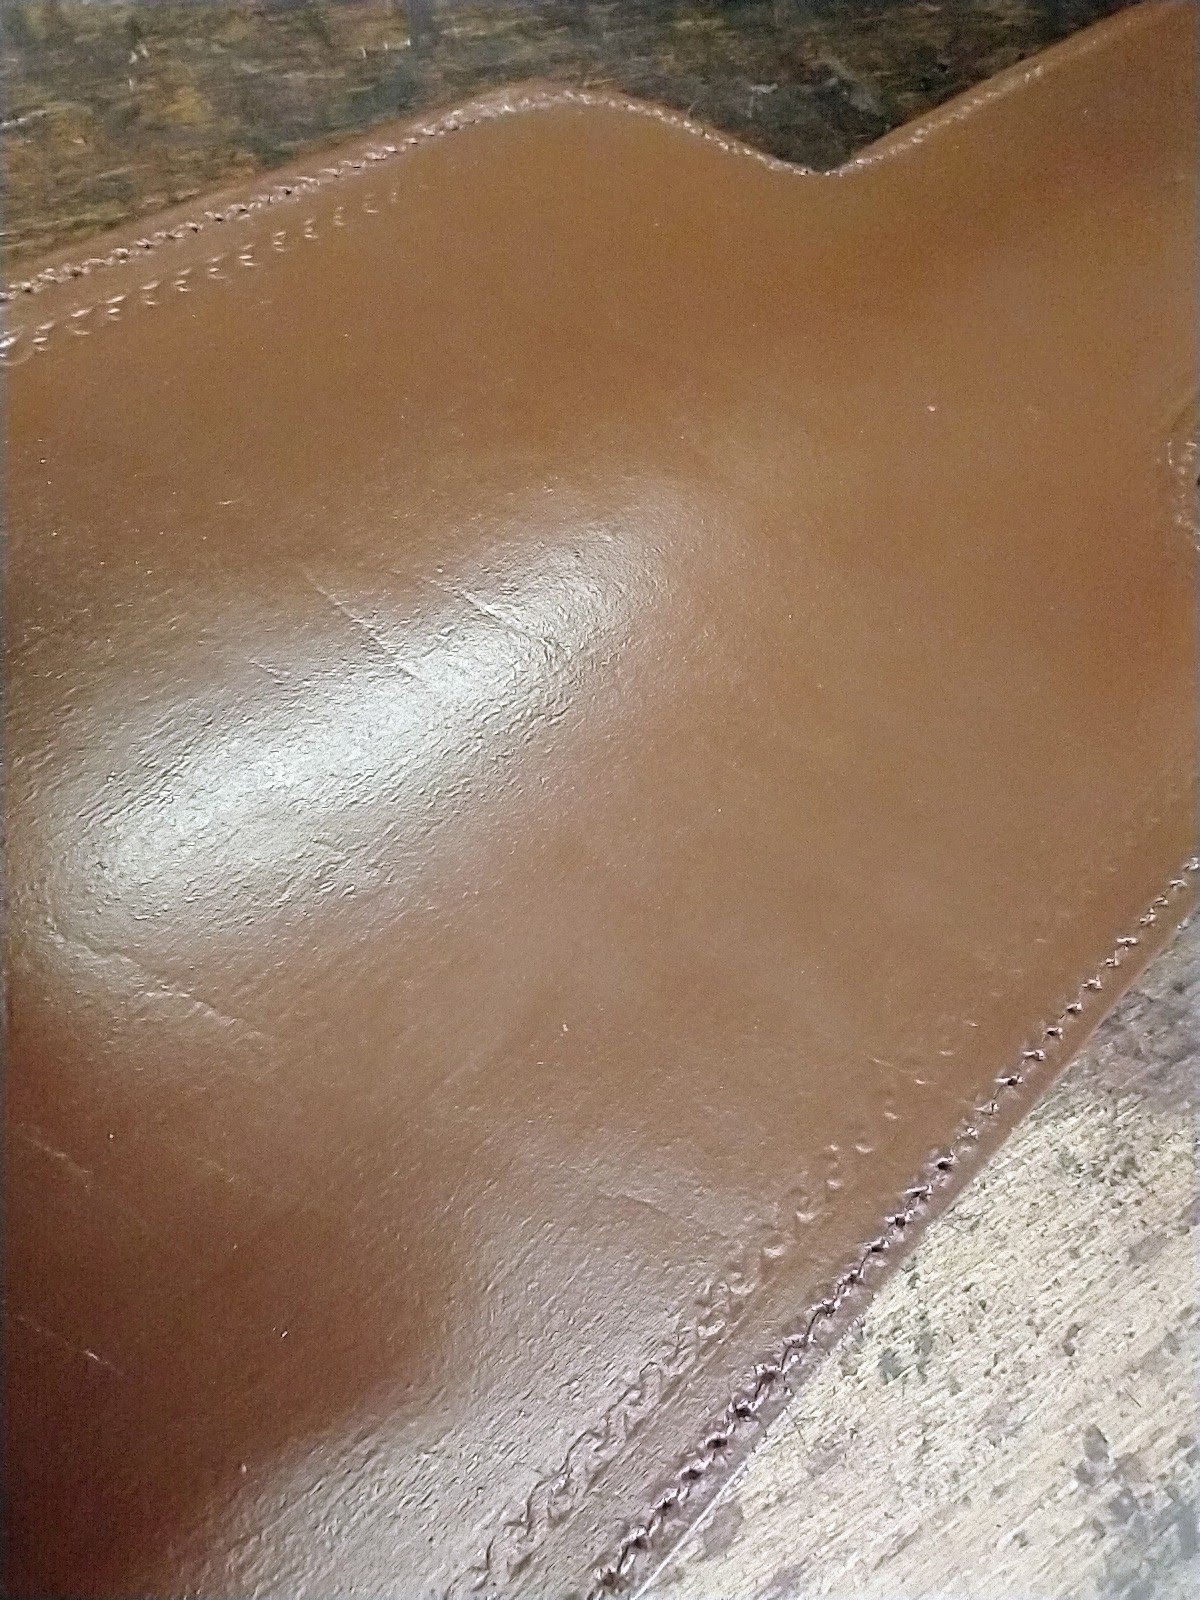 An old leather cartridge bag with a badly damaged flap and extremely dry leather